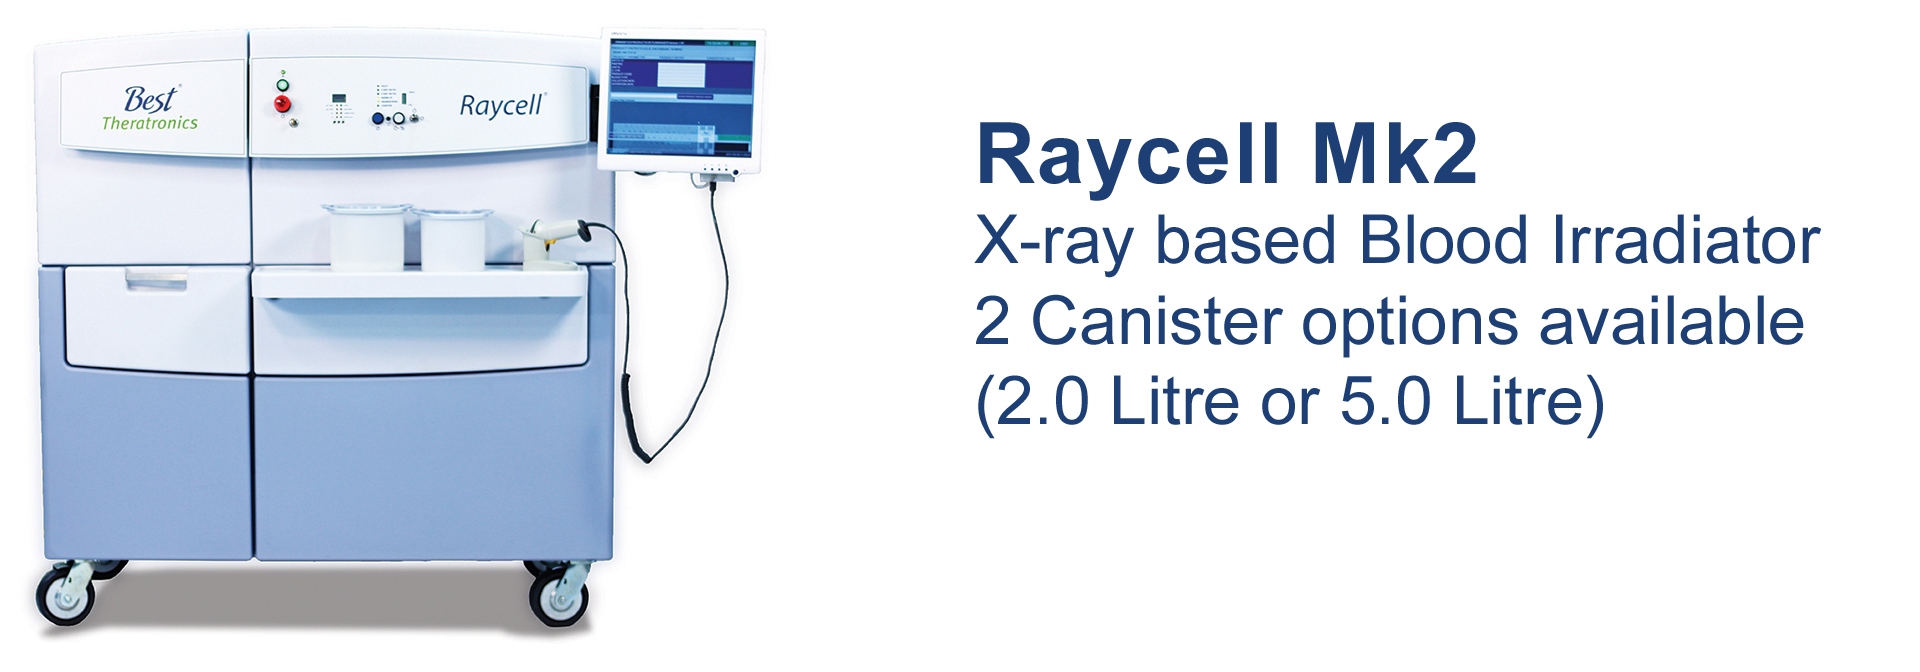 Raycell Mk2: X-Ray Based Blood Irradiator, 2 canister options available